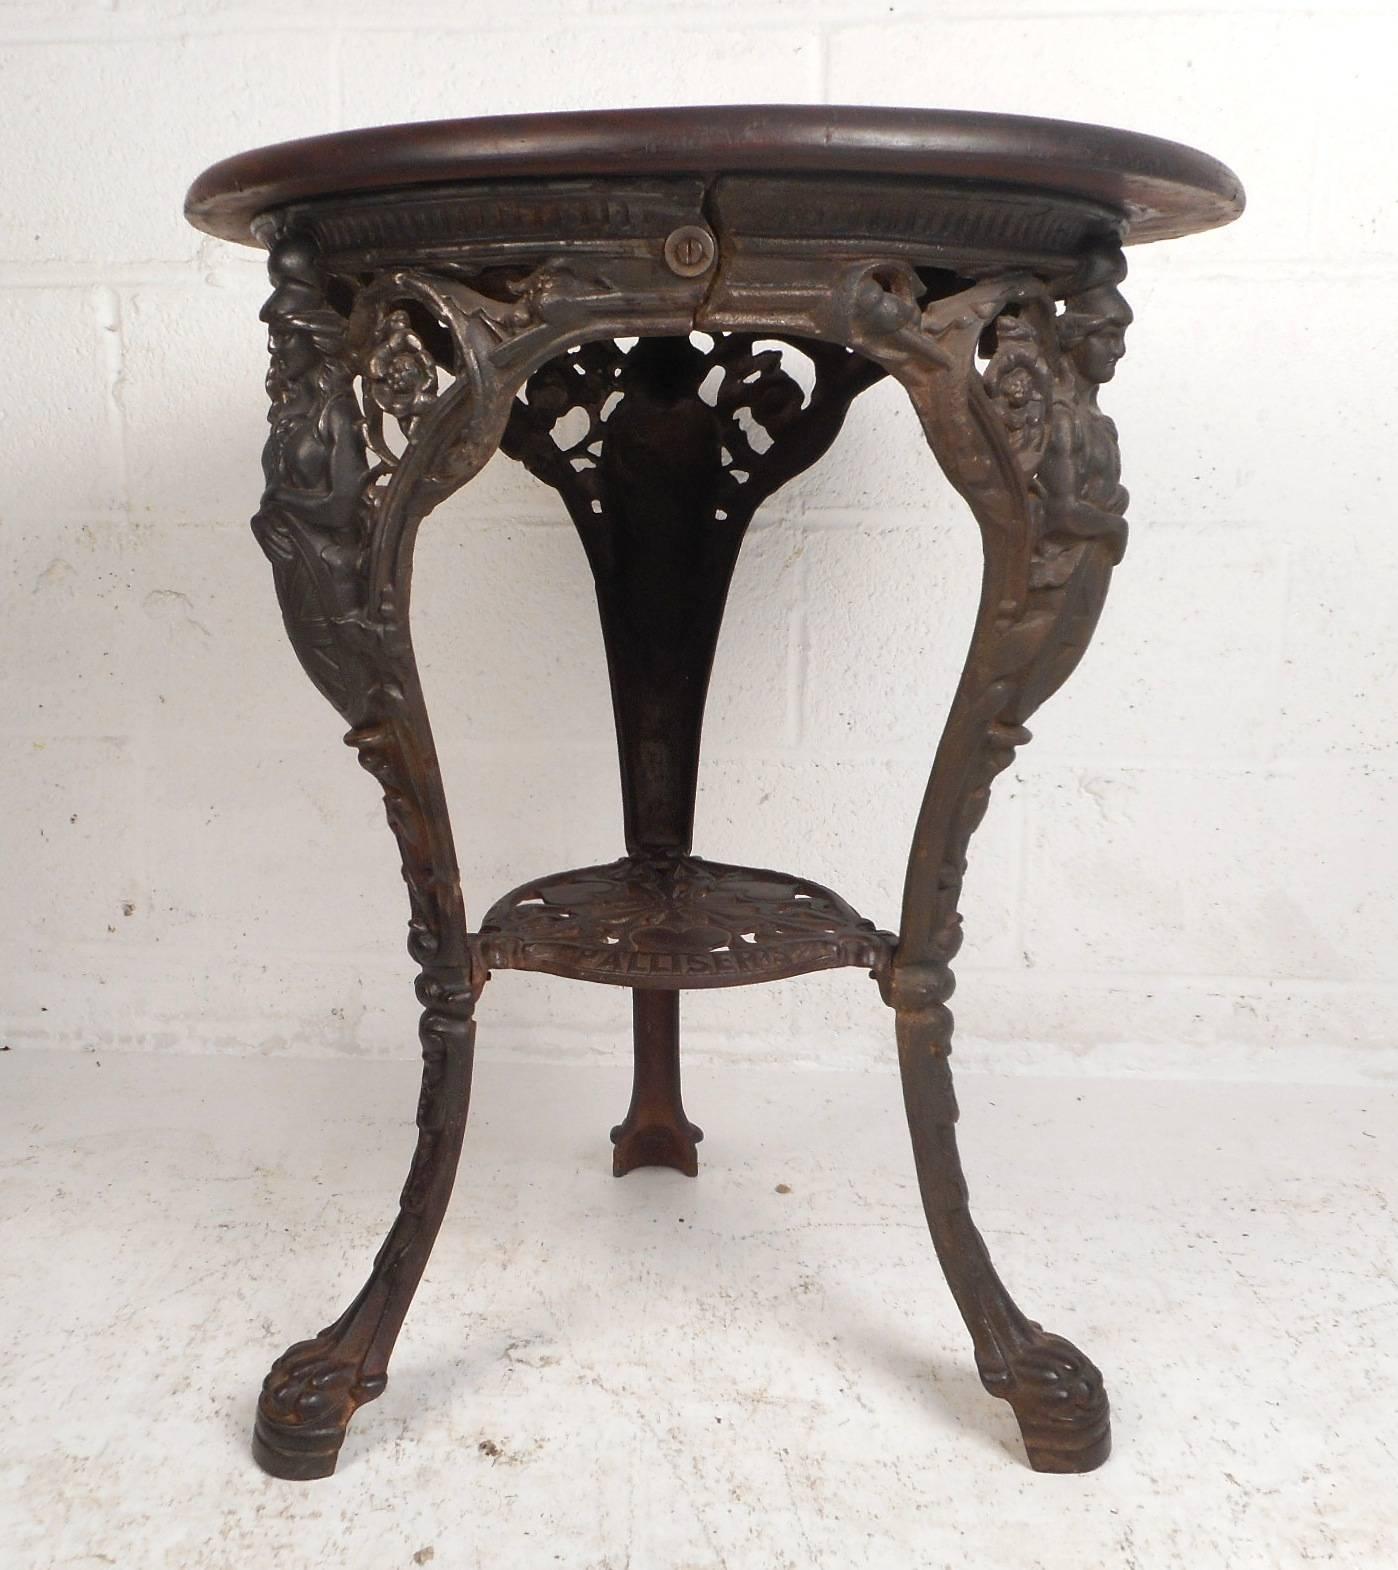 This beautiful vintage side table features a unique cast iron base with excellent detail. This exquisite piece has curved legs with paws as feet and floral designs throughout. The solid wood top shows true quality making this one of a kind side